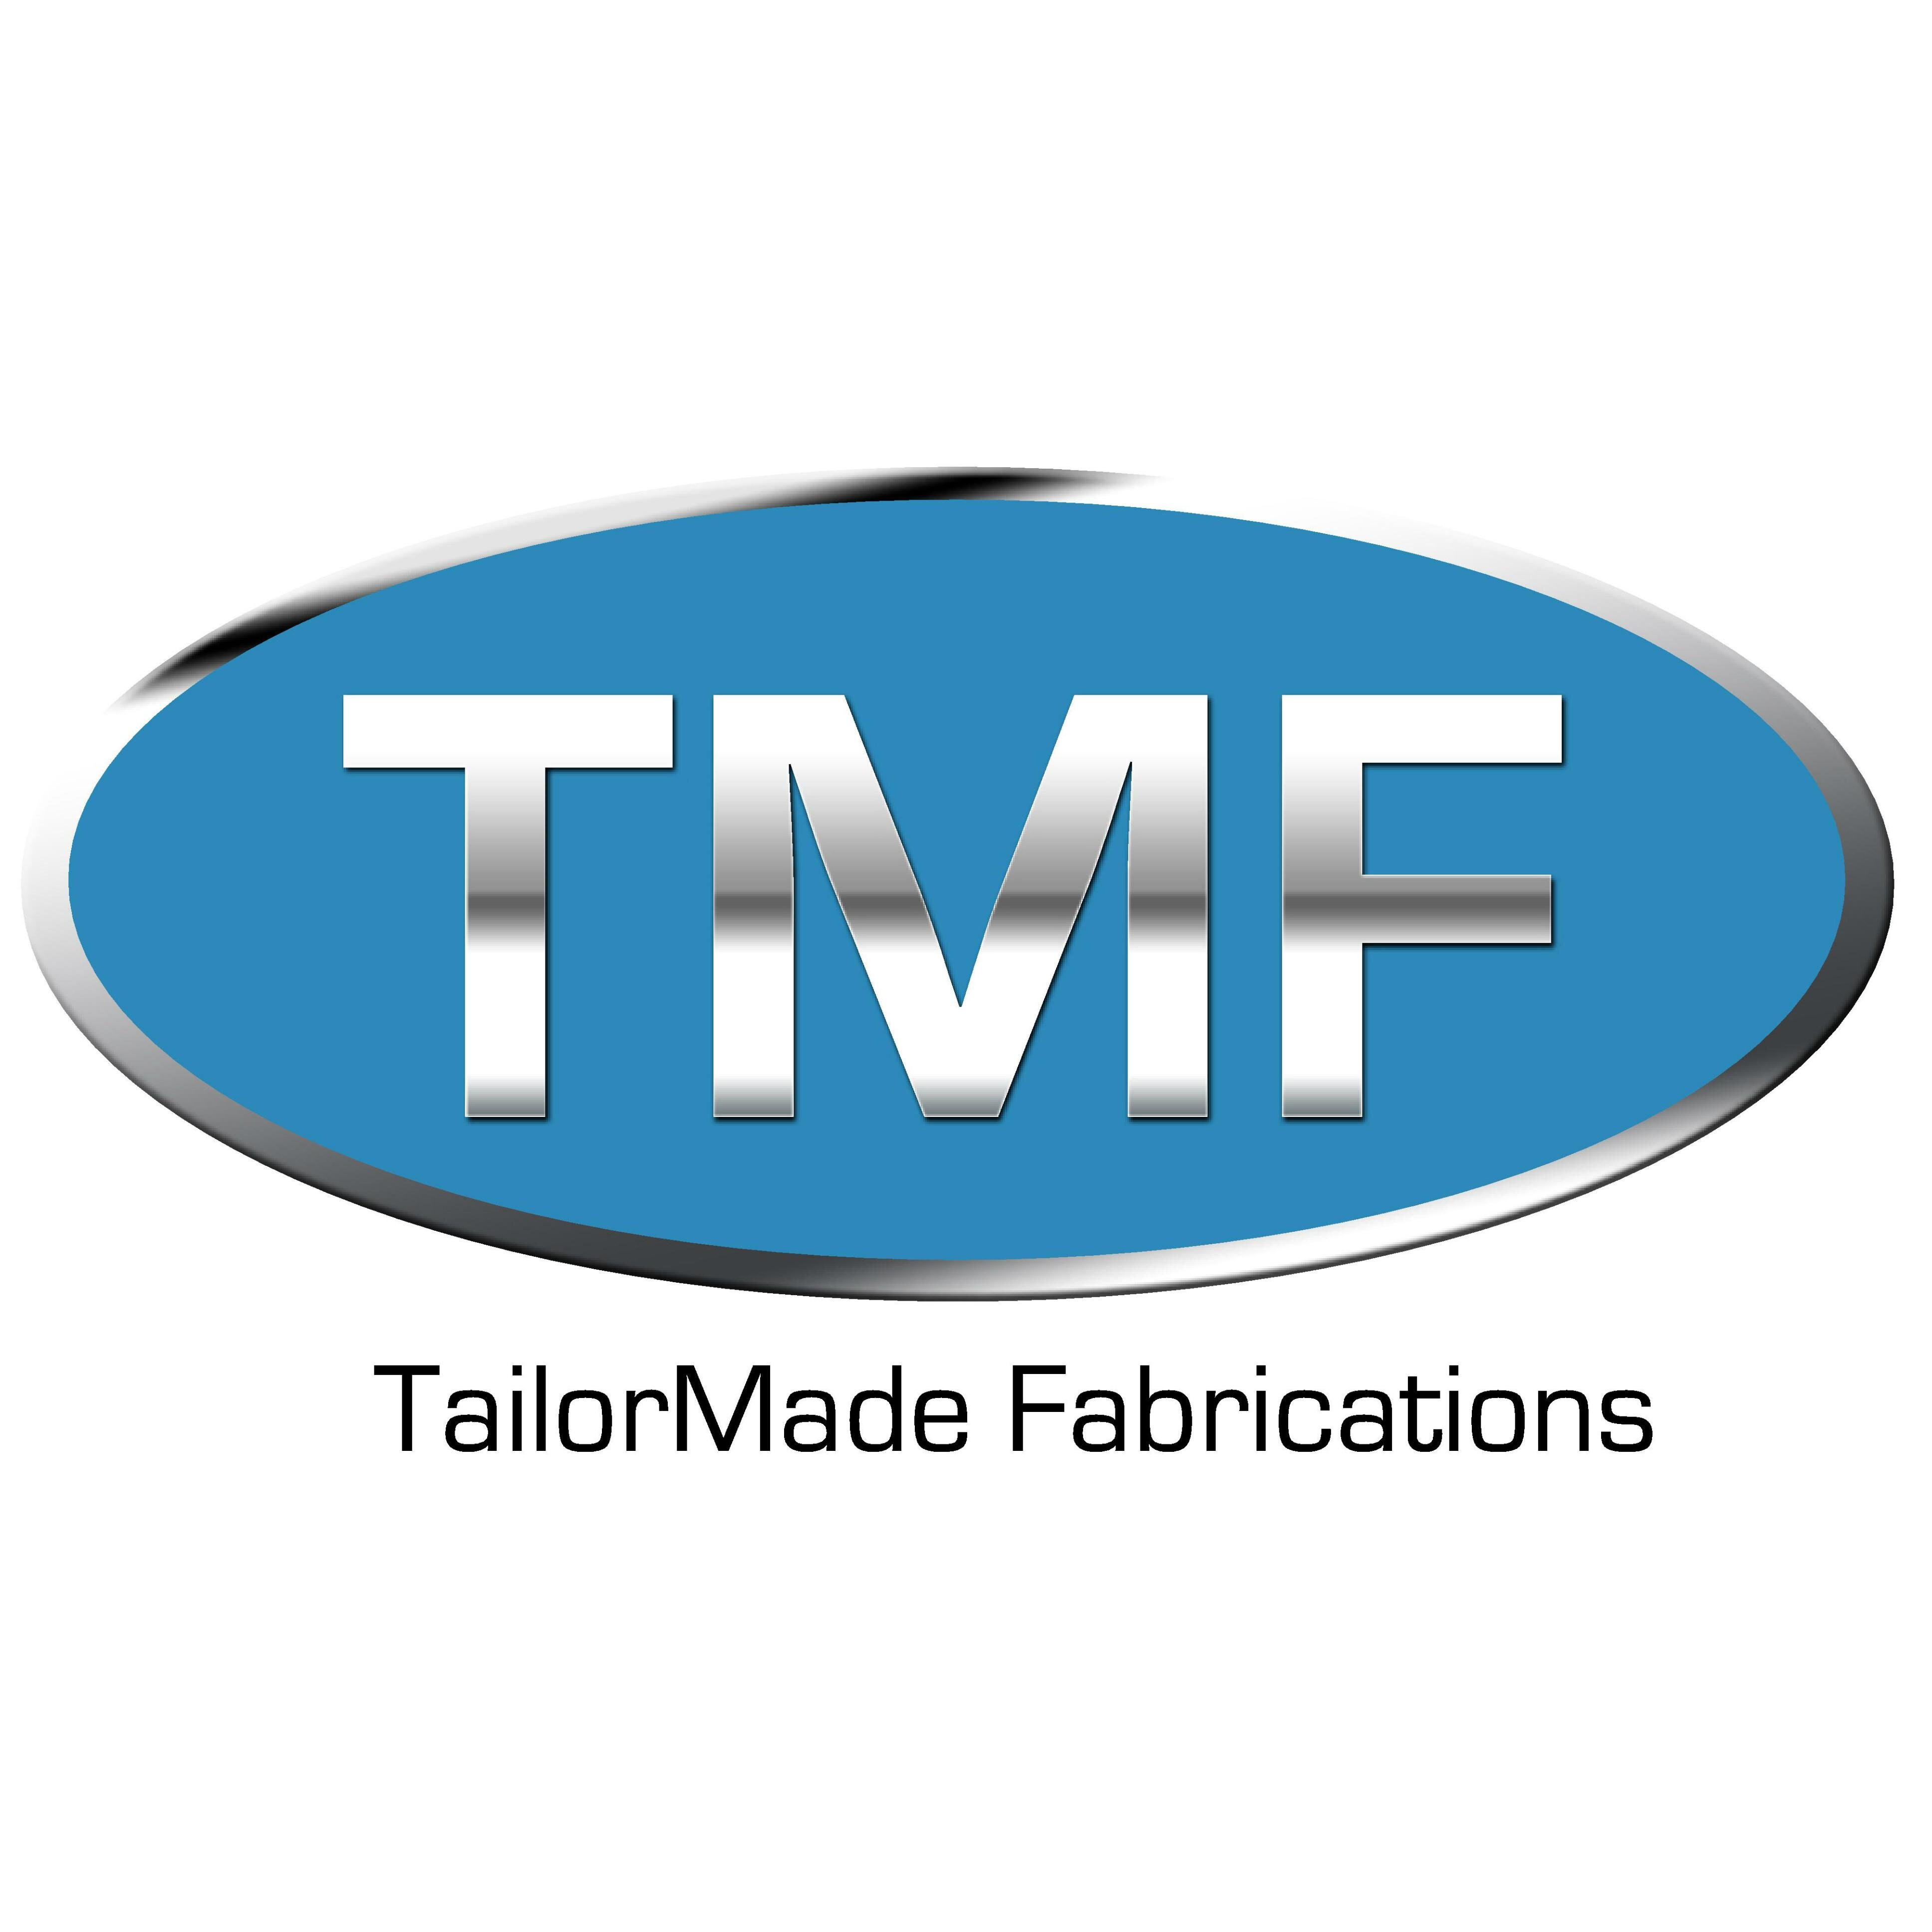 sales@tailormade-fabrications.co.uk 
Microbrewery equipment, Stainless steel, walkways, Pipework, Gates & railings, Fire escapes, Structural steel fab